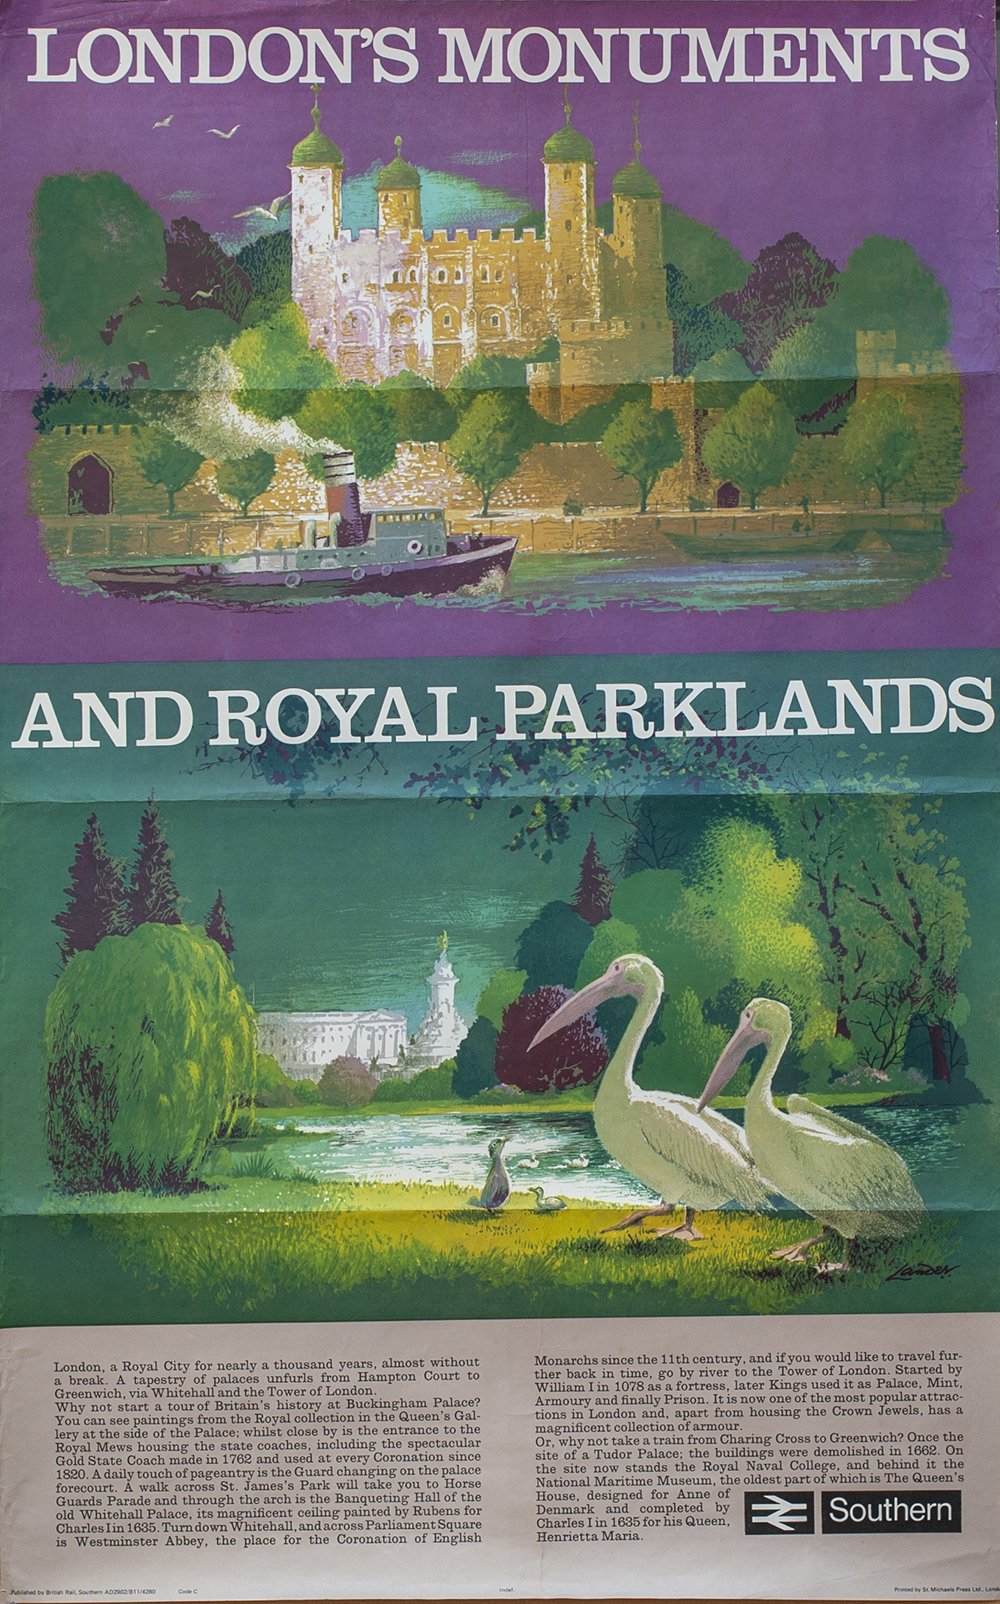 BR(S) DR London's Monuments, Lander Poster BR(S) LONDON'S MONUMENTS AND ROYAL PARKLANDS by